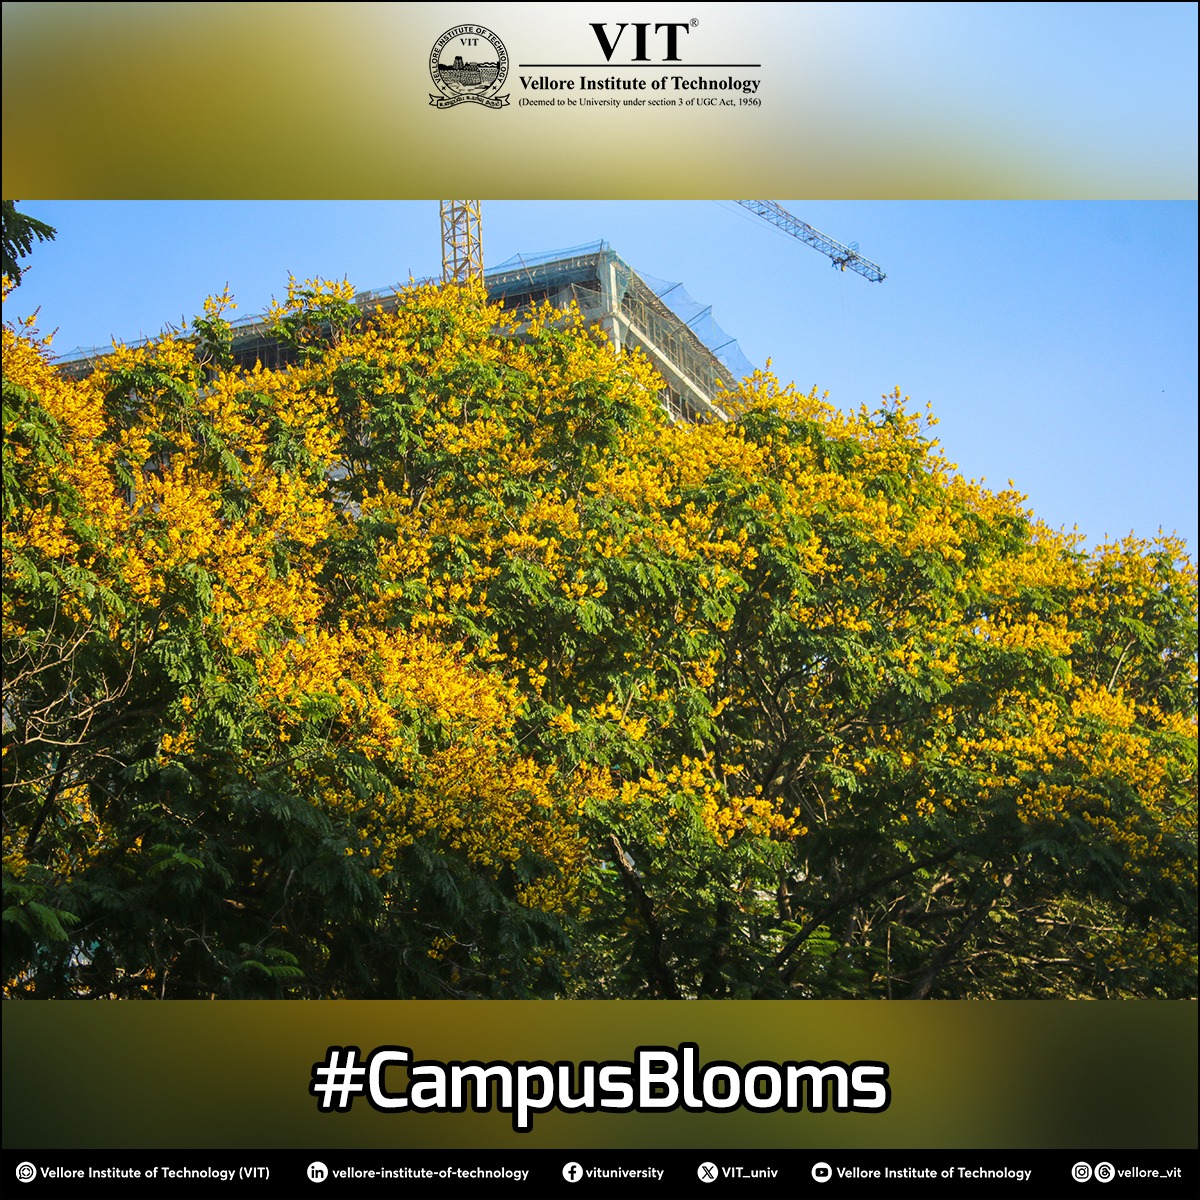 Blooming hope of brightness in the rays of summer at the campus.

Pic credit: @victor_jo_0913

#VIT #VelloreInstituteofTechnology #CampusLife #LifeAtVIT #FlowerBlossoms #NaturePhotography #CampusPhotography #VITCampus